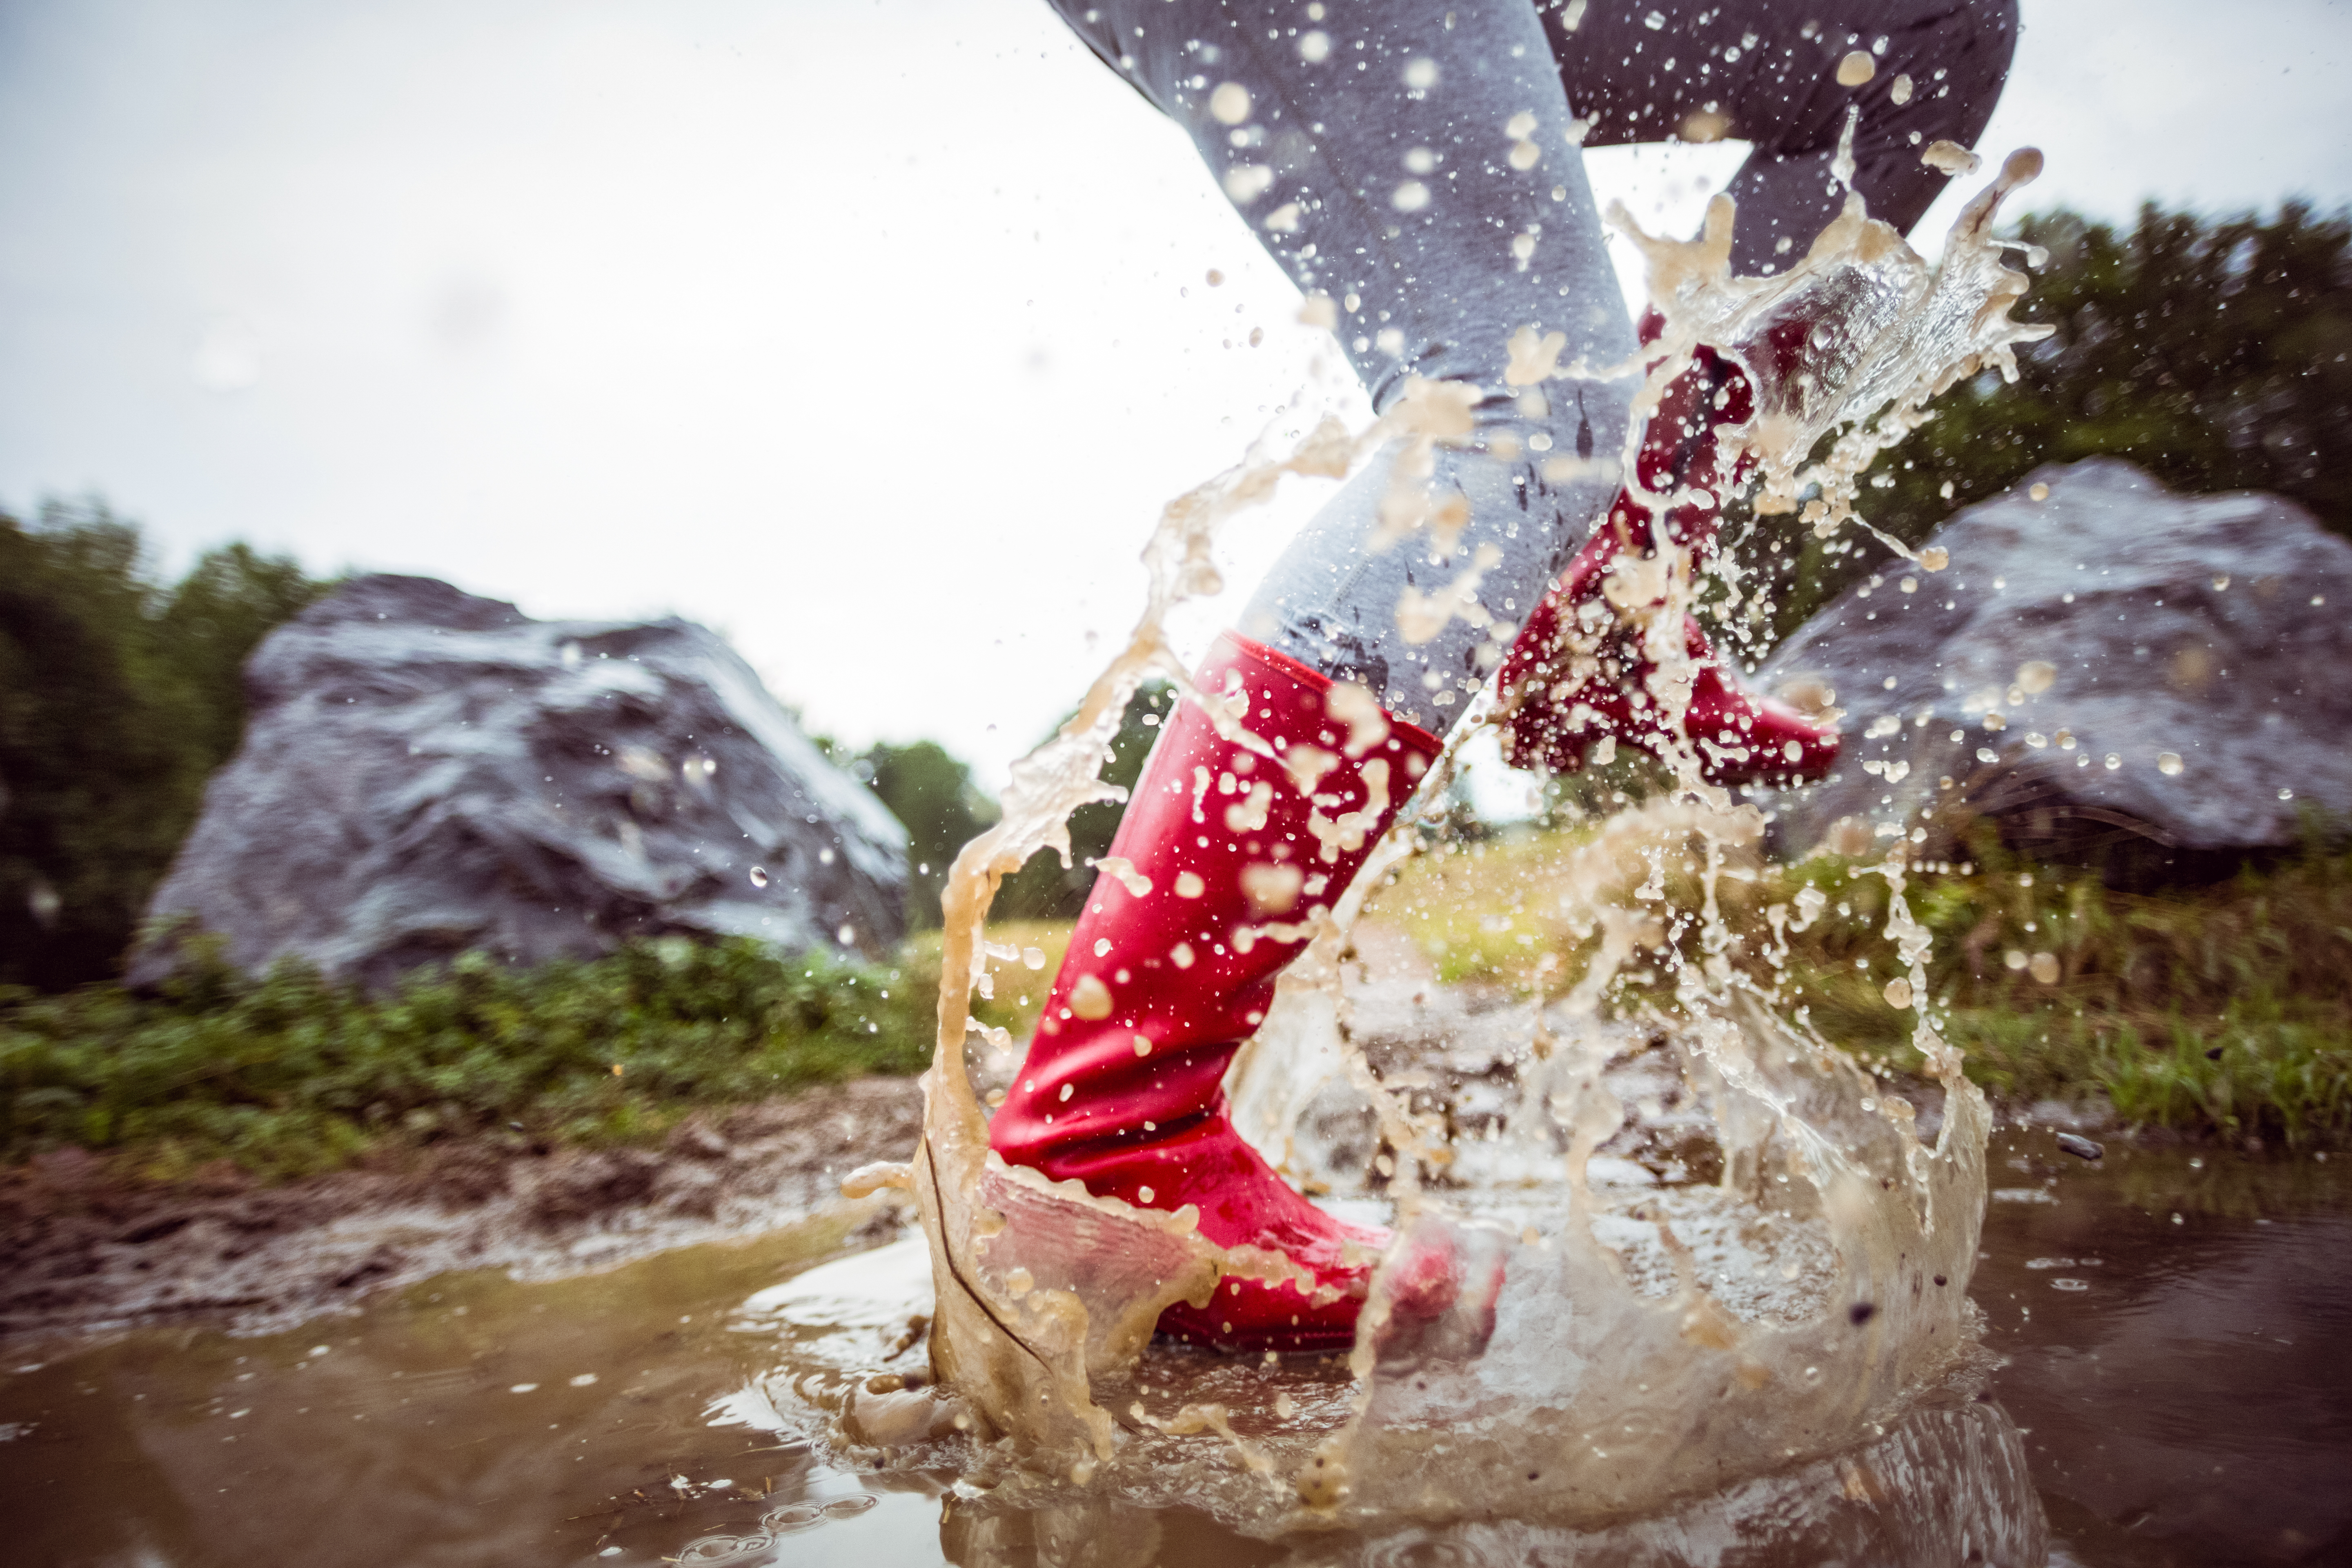 A woman wearing rain boots splashing through a puddle in the yard.